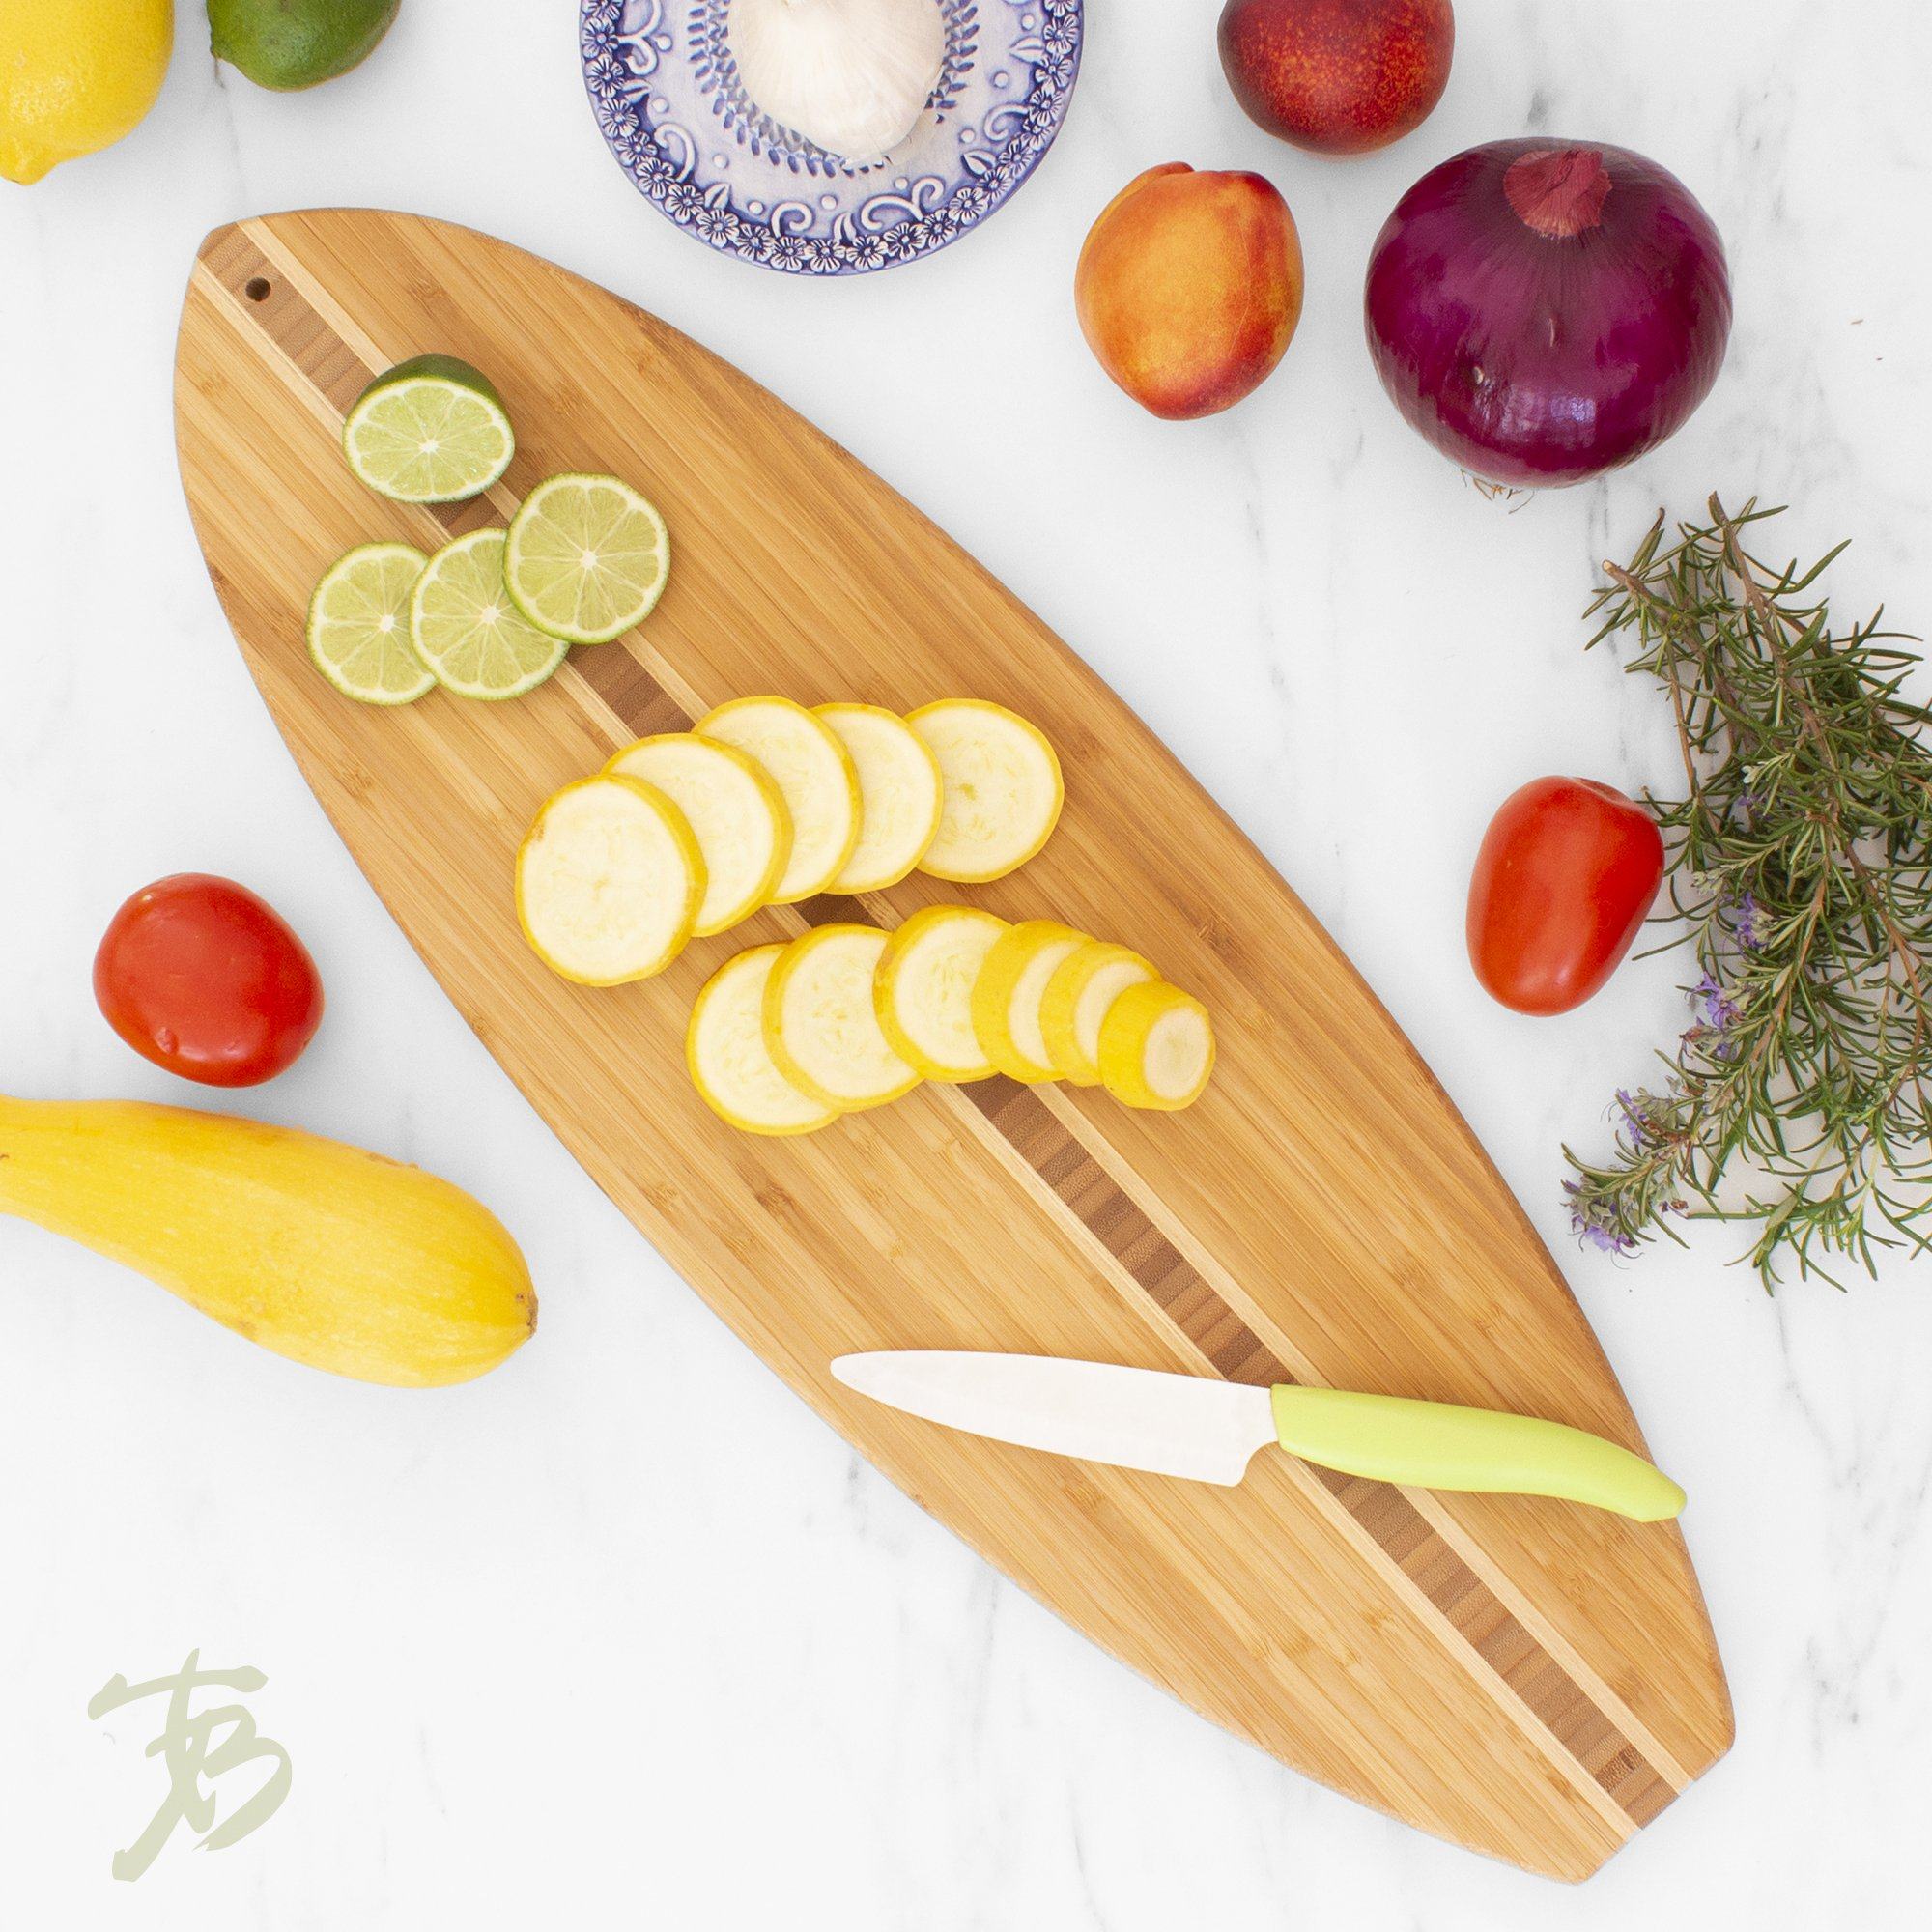  Wesiti 4 Pcs Surfboard Cutting Board Bamboo Cutting Board Set  23 x 7 Inches Wood Charcuterie Serving Board Bamboo Surfboard for Home  Cheese Fruit Bread Kitchen Supplies DIY Gifts Wall Decoration